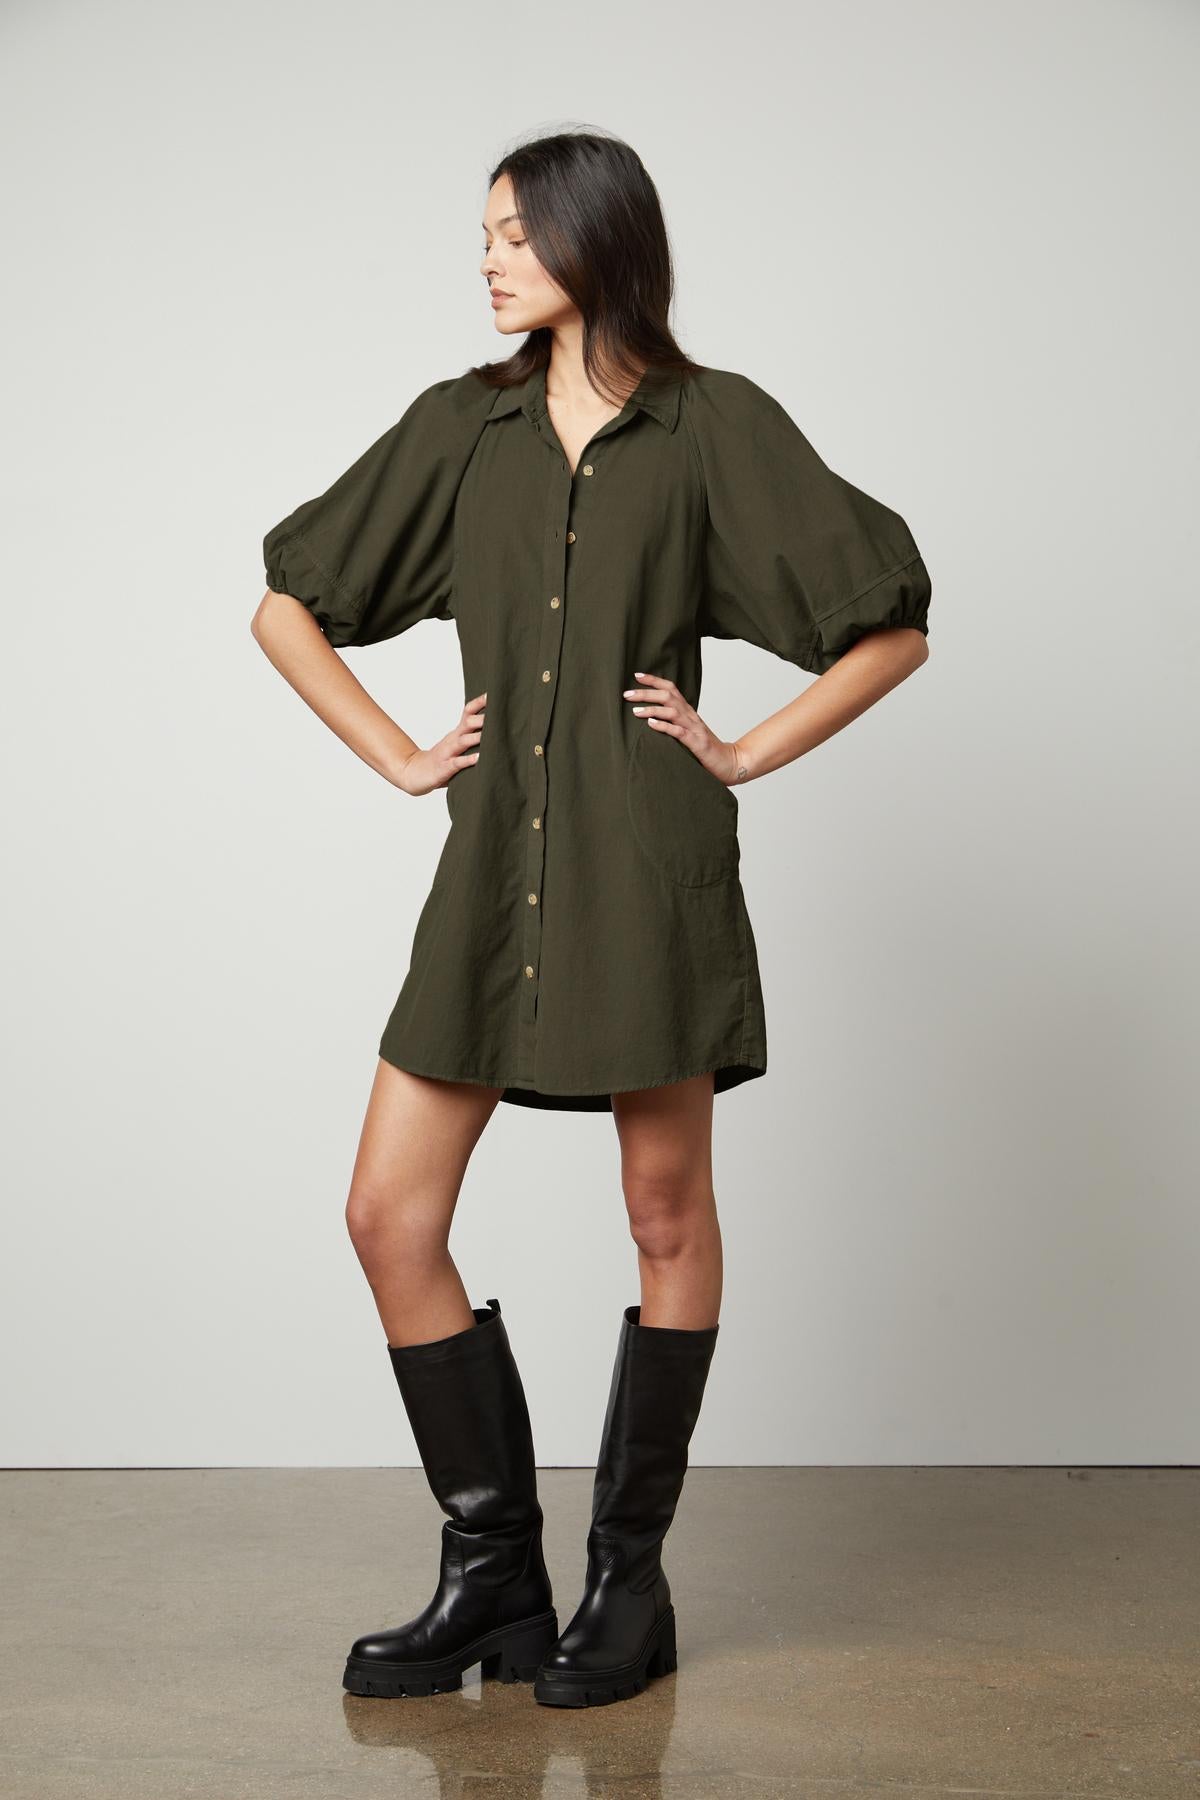   The model is wearing a KADY CORDUROY BUTTON-UP DRESS by Velvet by Graham & Spencer, perfect for everyday wear. 